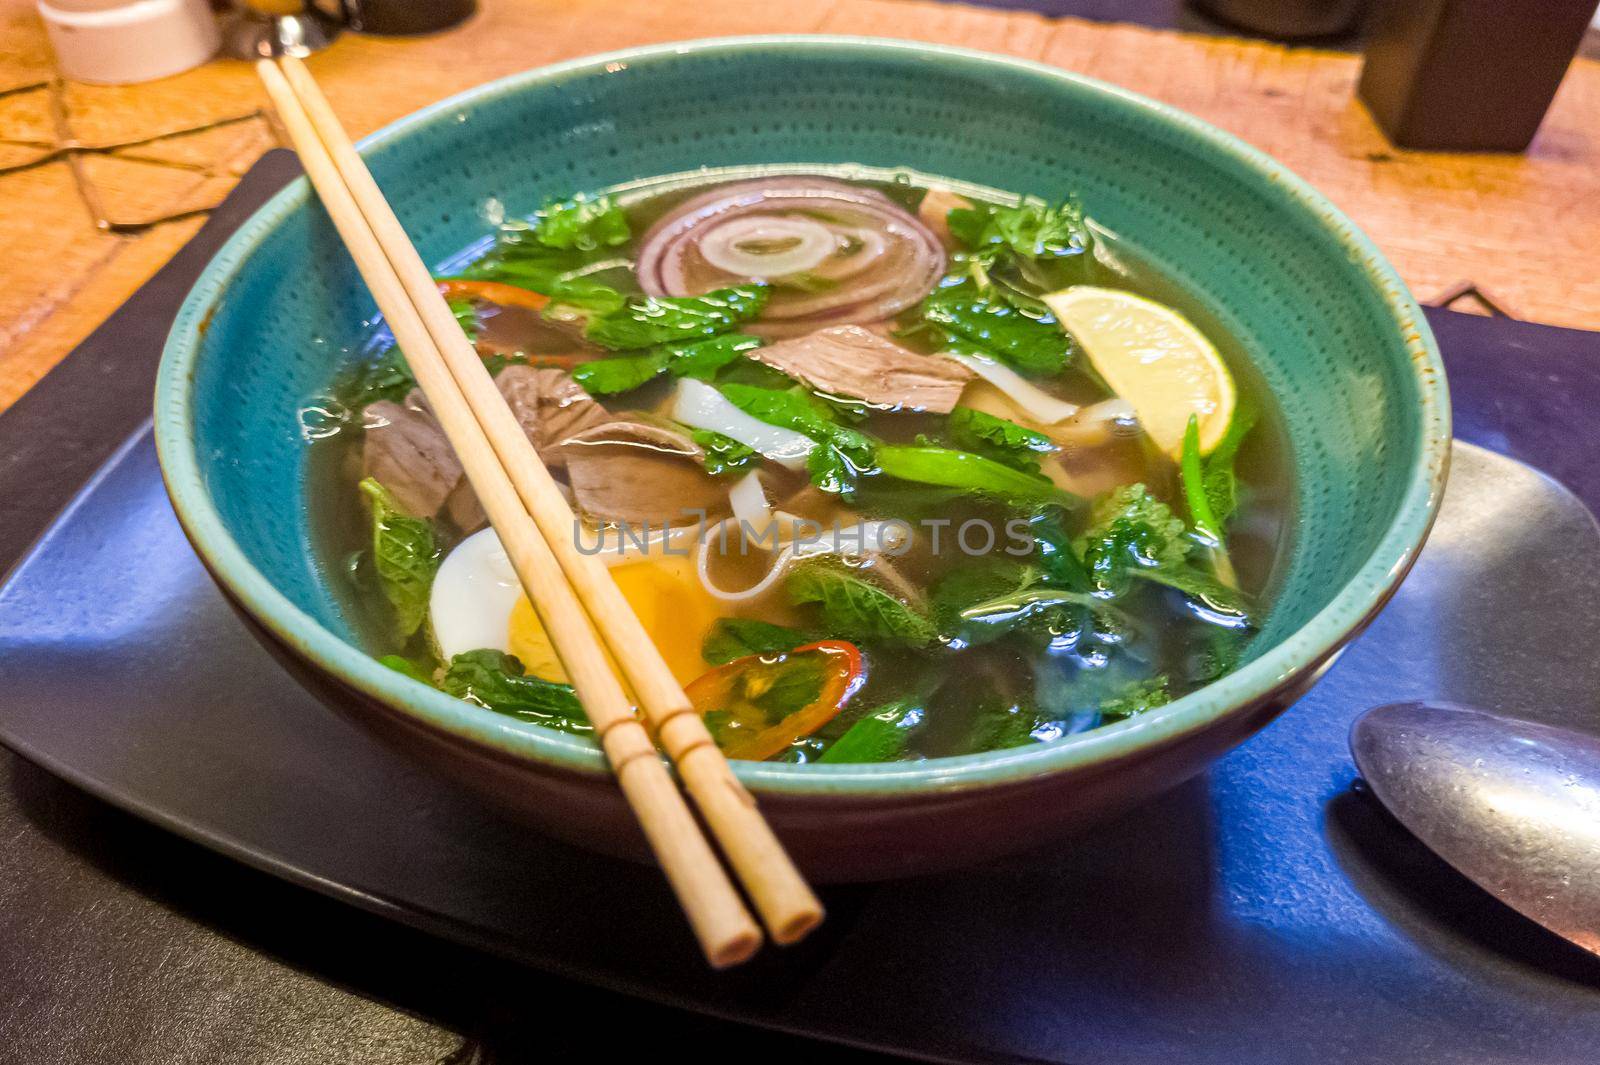 Asian soup with beef, noodles and egg, similar to pho bo or ramen.